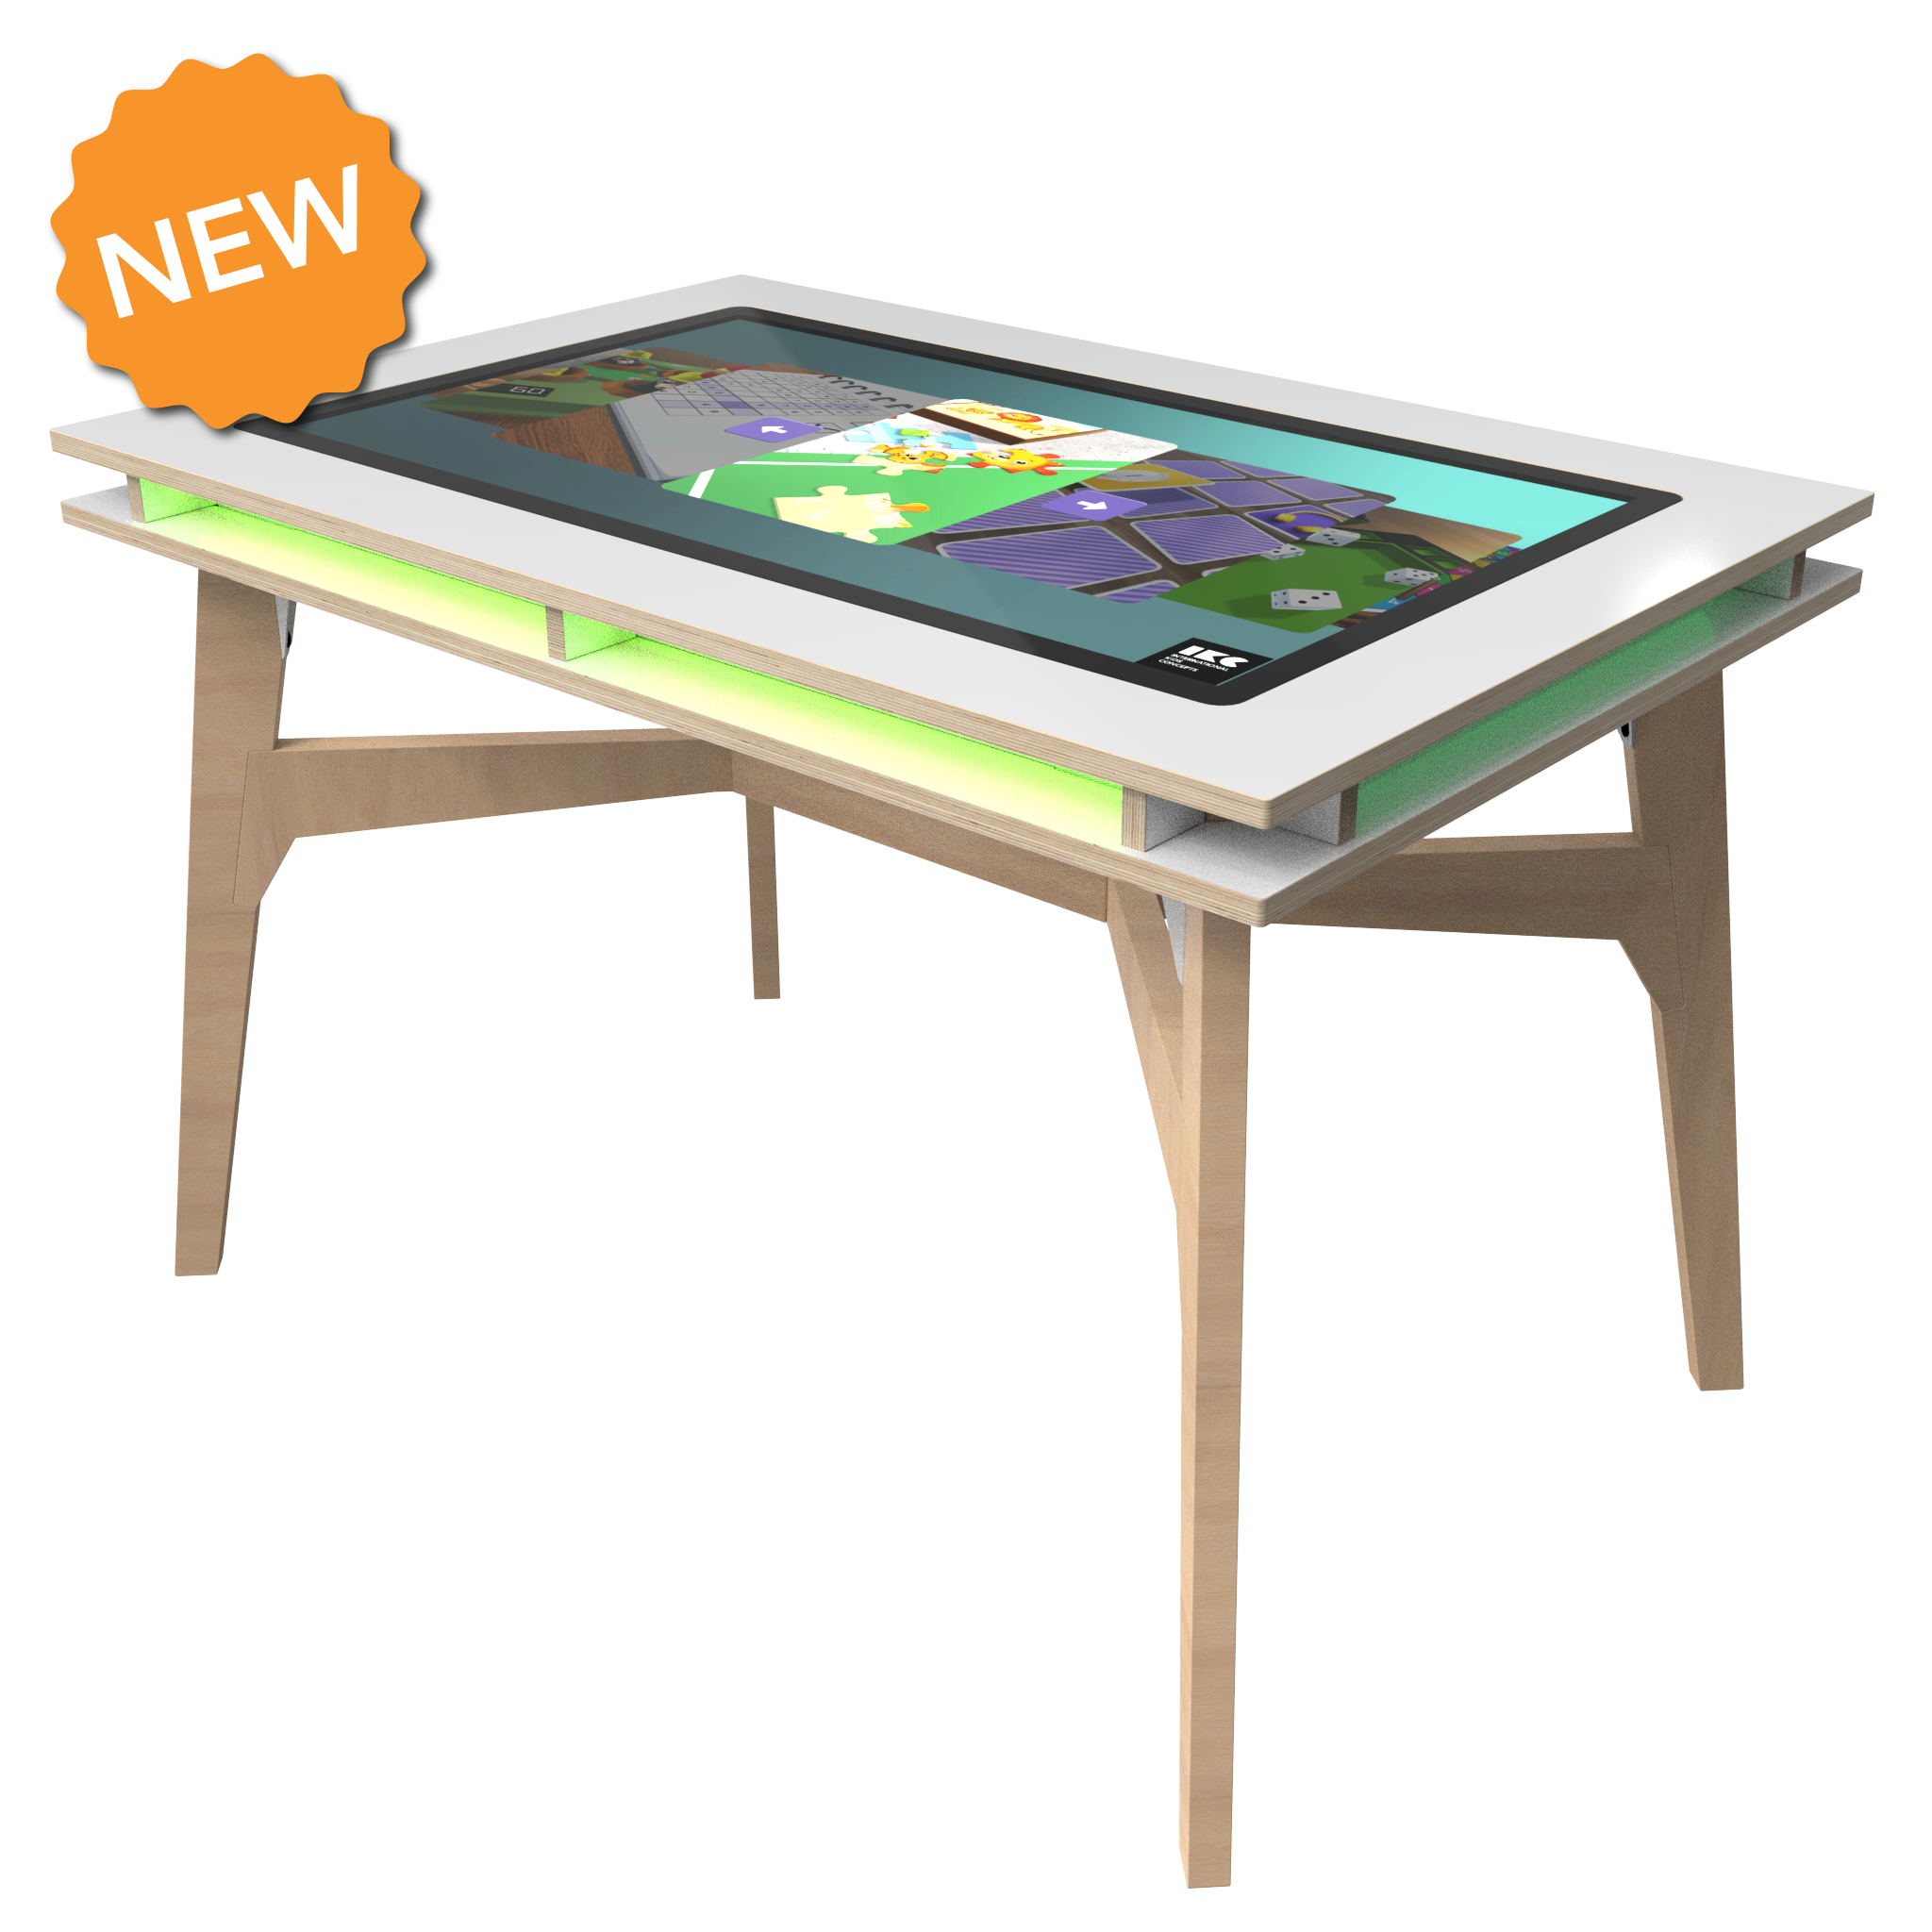 IKC collection I One 4 All Play table, Entertainment for every family in your kids corner